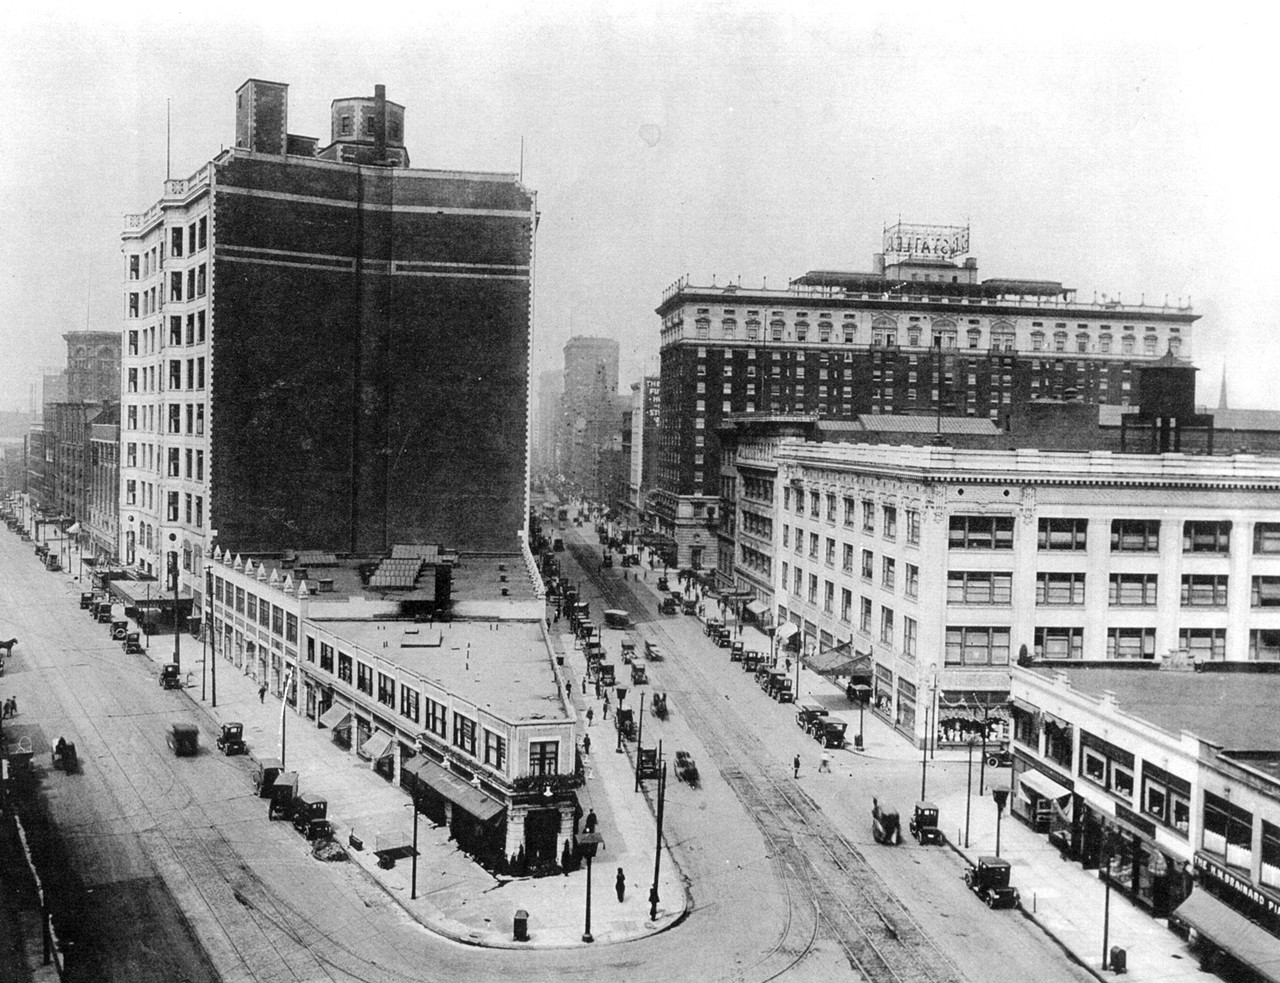 Playhouse Square in the early 20th century.